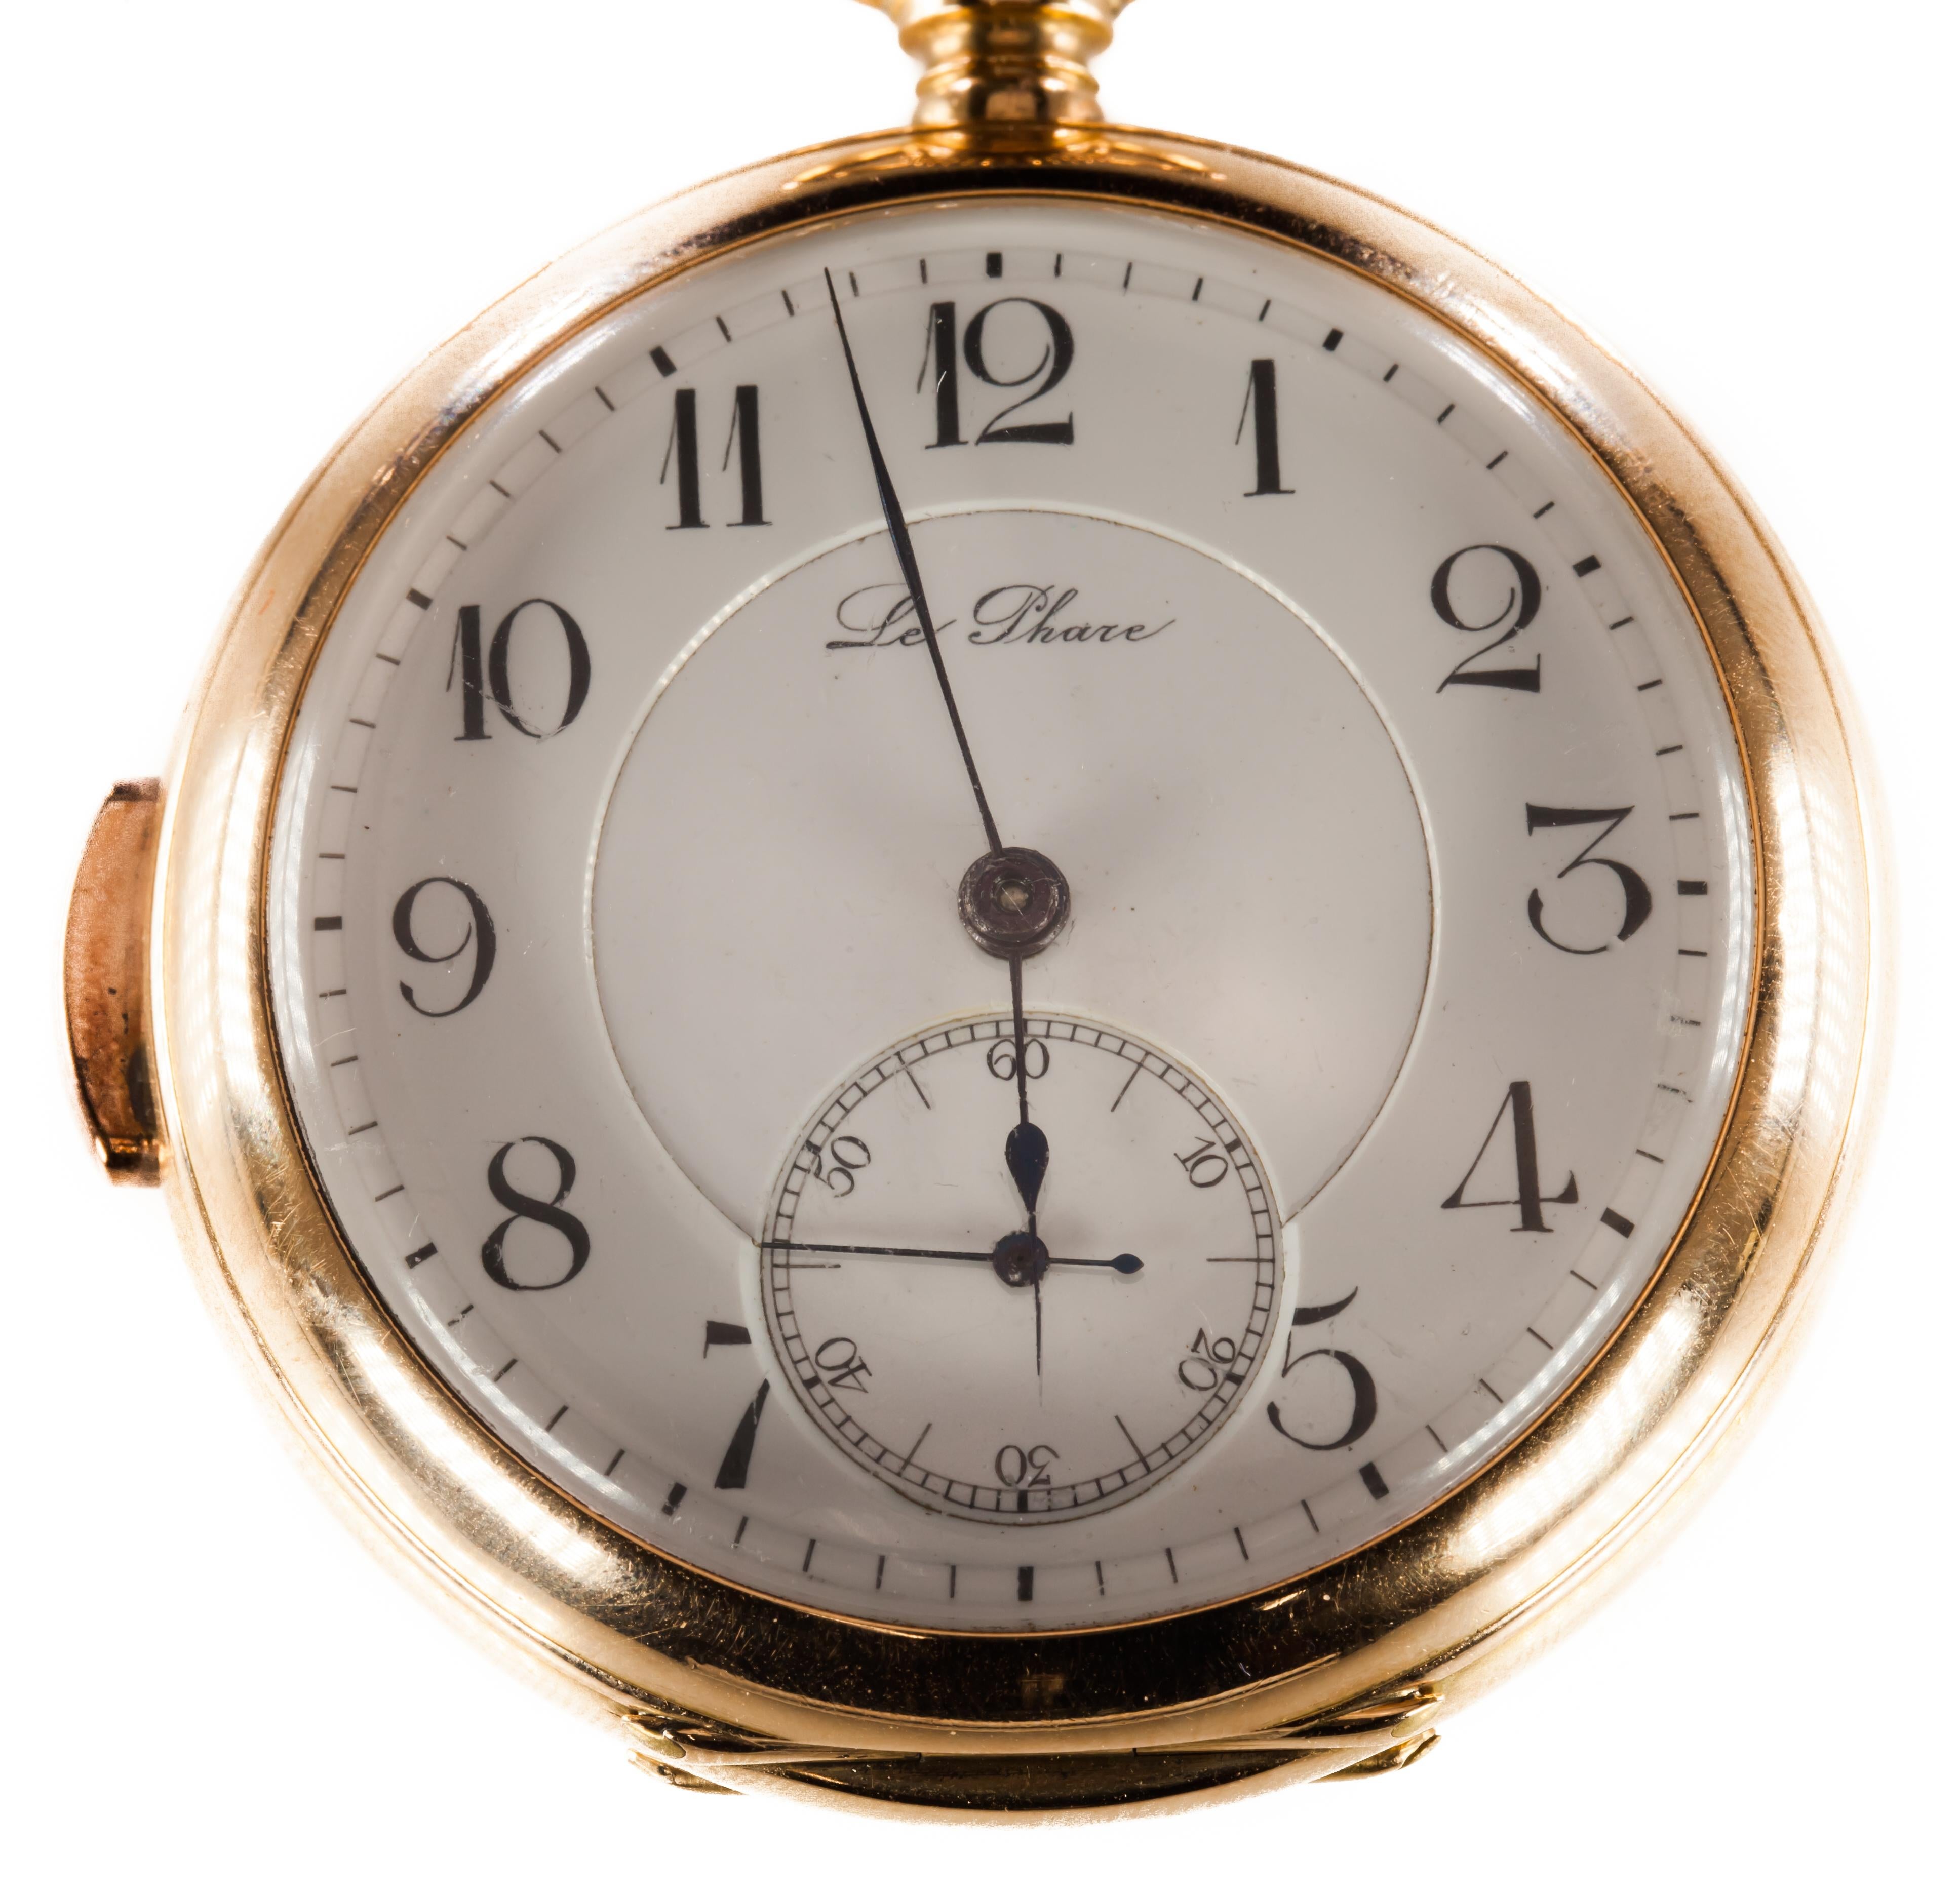 Gorgeous Vintage Open-Face Pocket Watch by Le Phare
Features Minute Repeater Gong
Open Face Design, Dedicated Second Dial
18k Yellow Gold Case w/ Ornate Inner Cover, Machine-Turned (Guilloche) Outer Cover
Movement is 43 mm in Diameter (Size